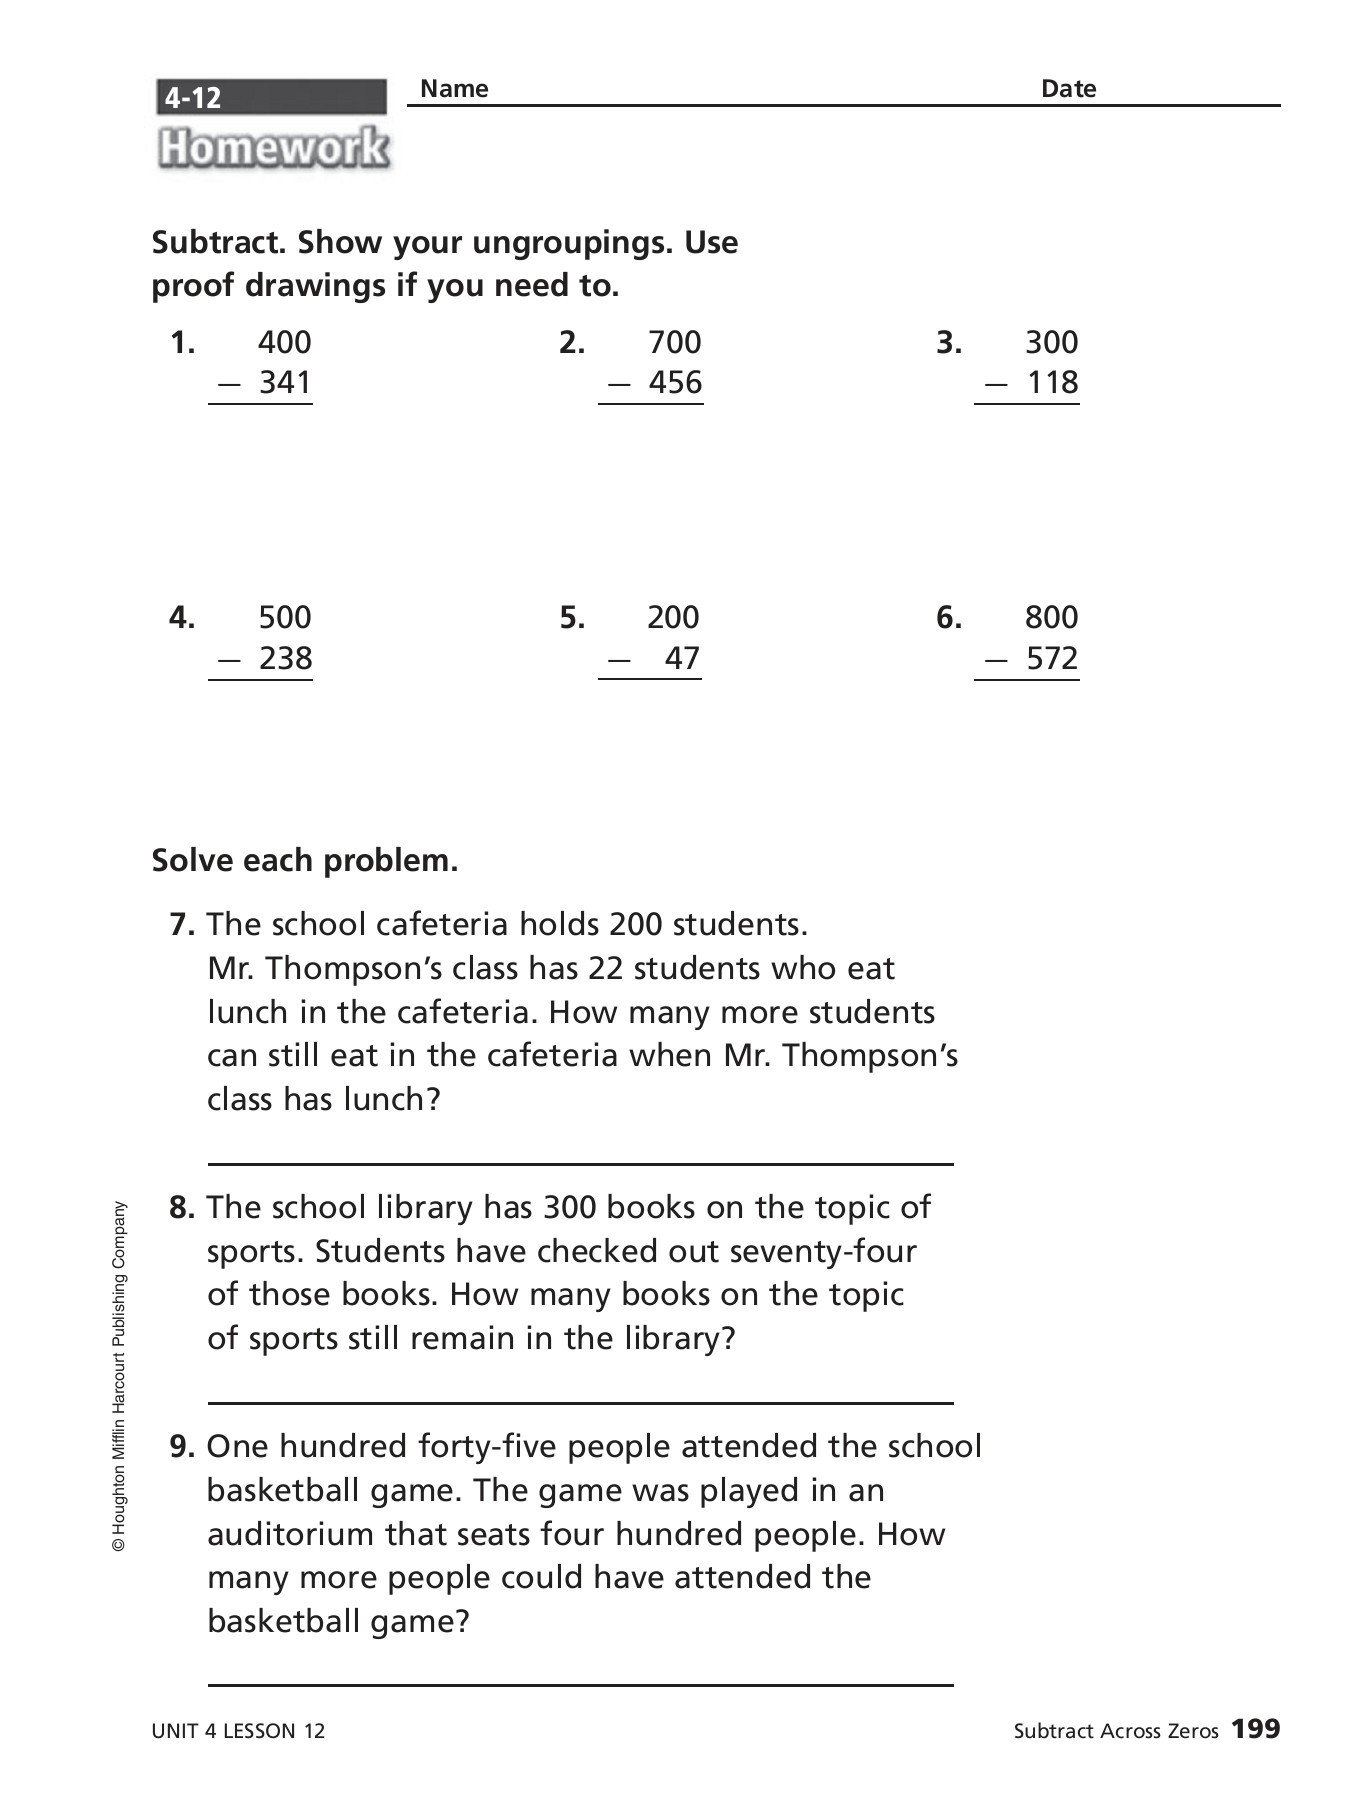 Teachers Guide For Workbook 3 Pages 201  250  Text Version  Fliphtml5 Intended For Houghton Mifflin Harcourt Publishing Company Math Worksheet Answers